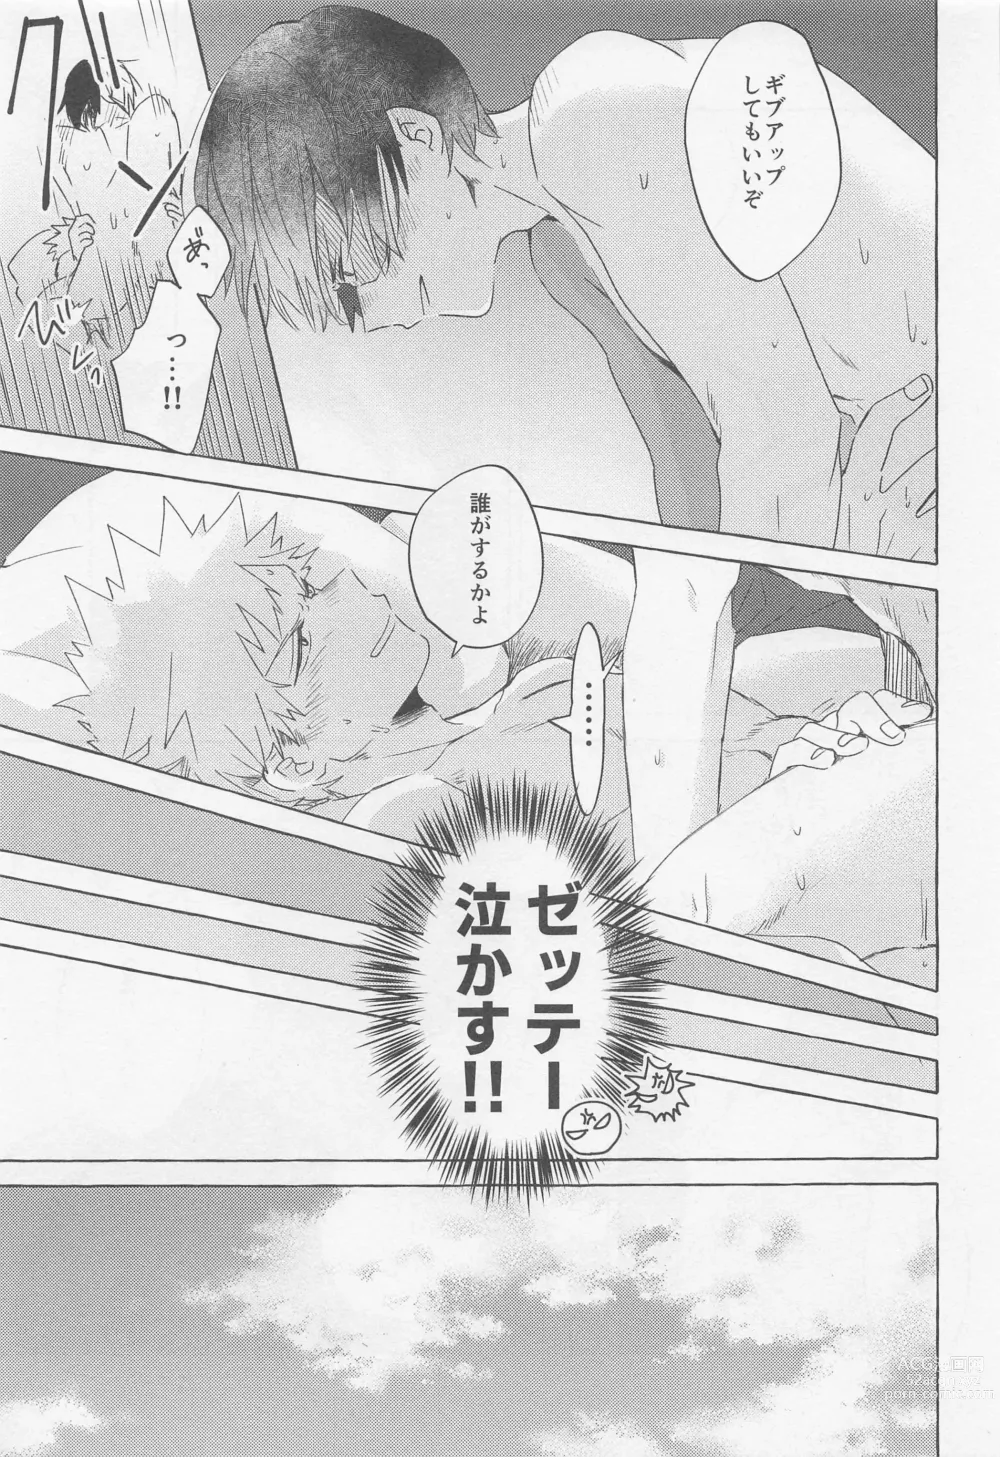 Page 24 of doujinshi Overnight Fight